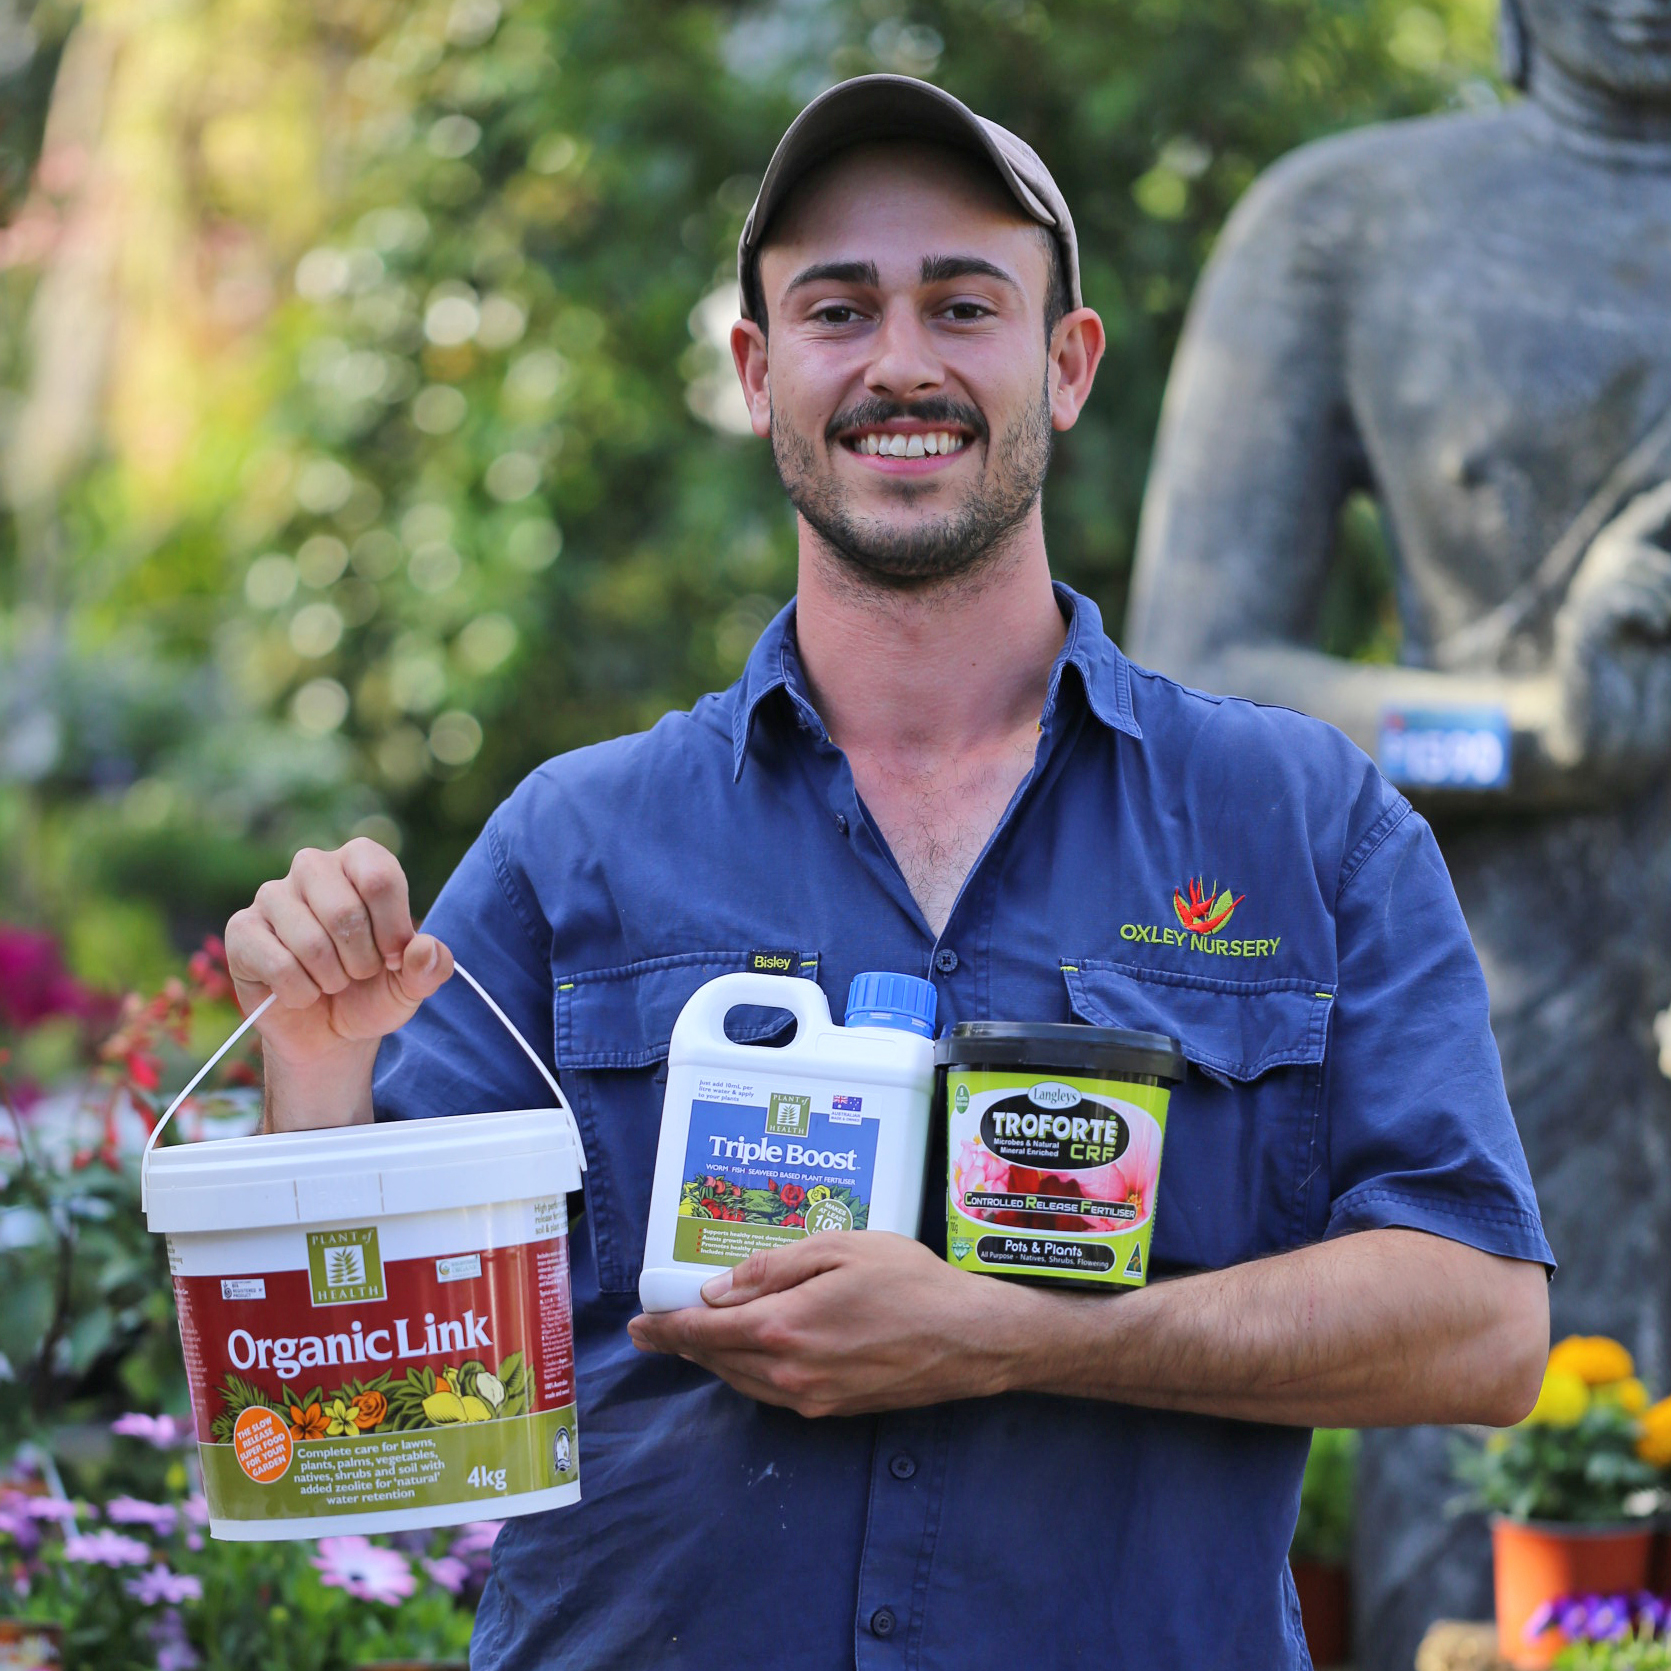 fertilising-and-plant-care-oxley-nursery